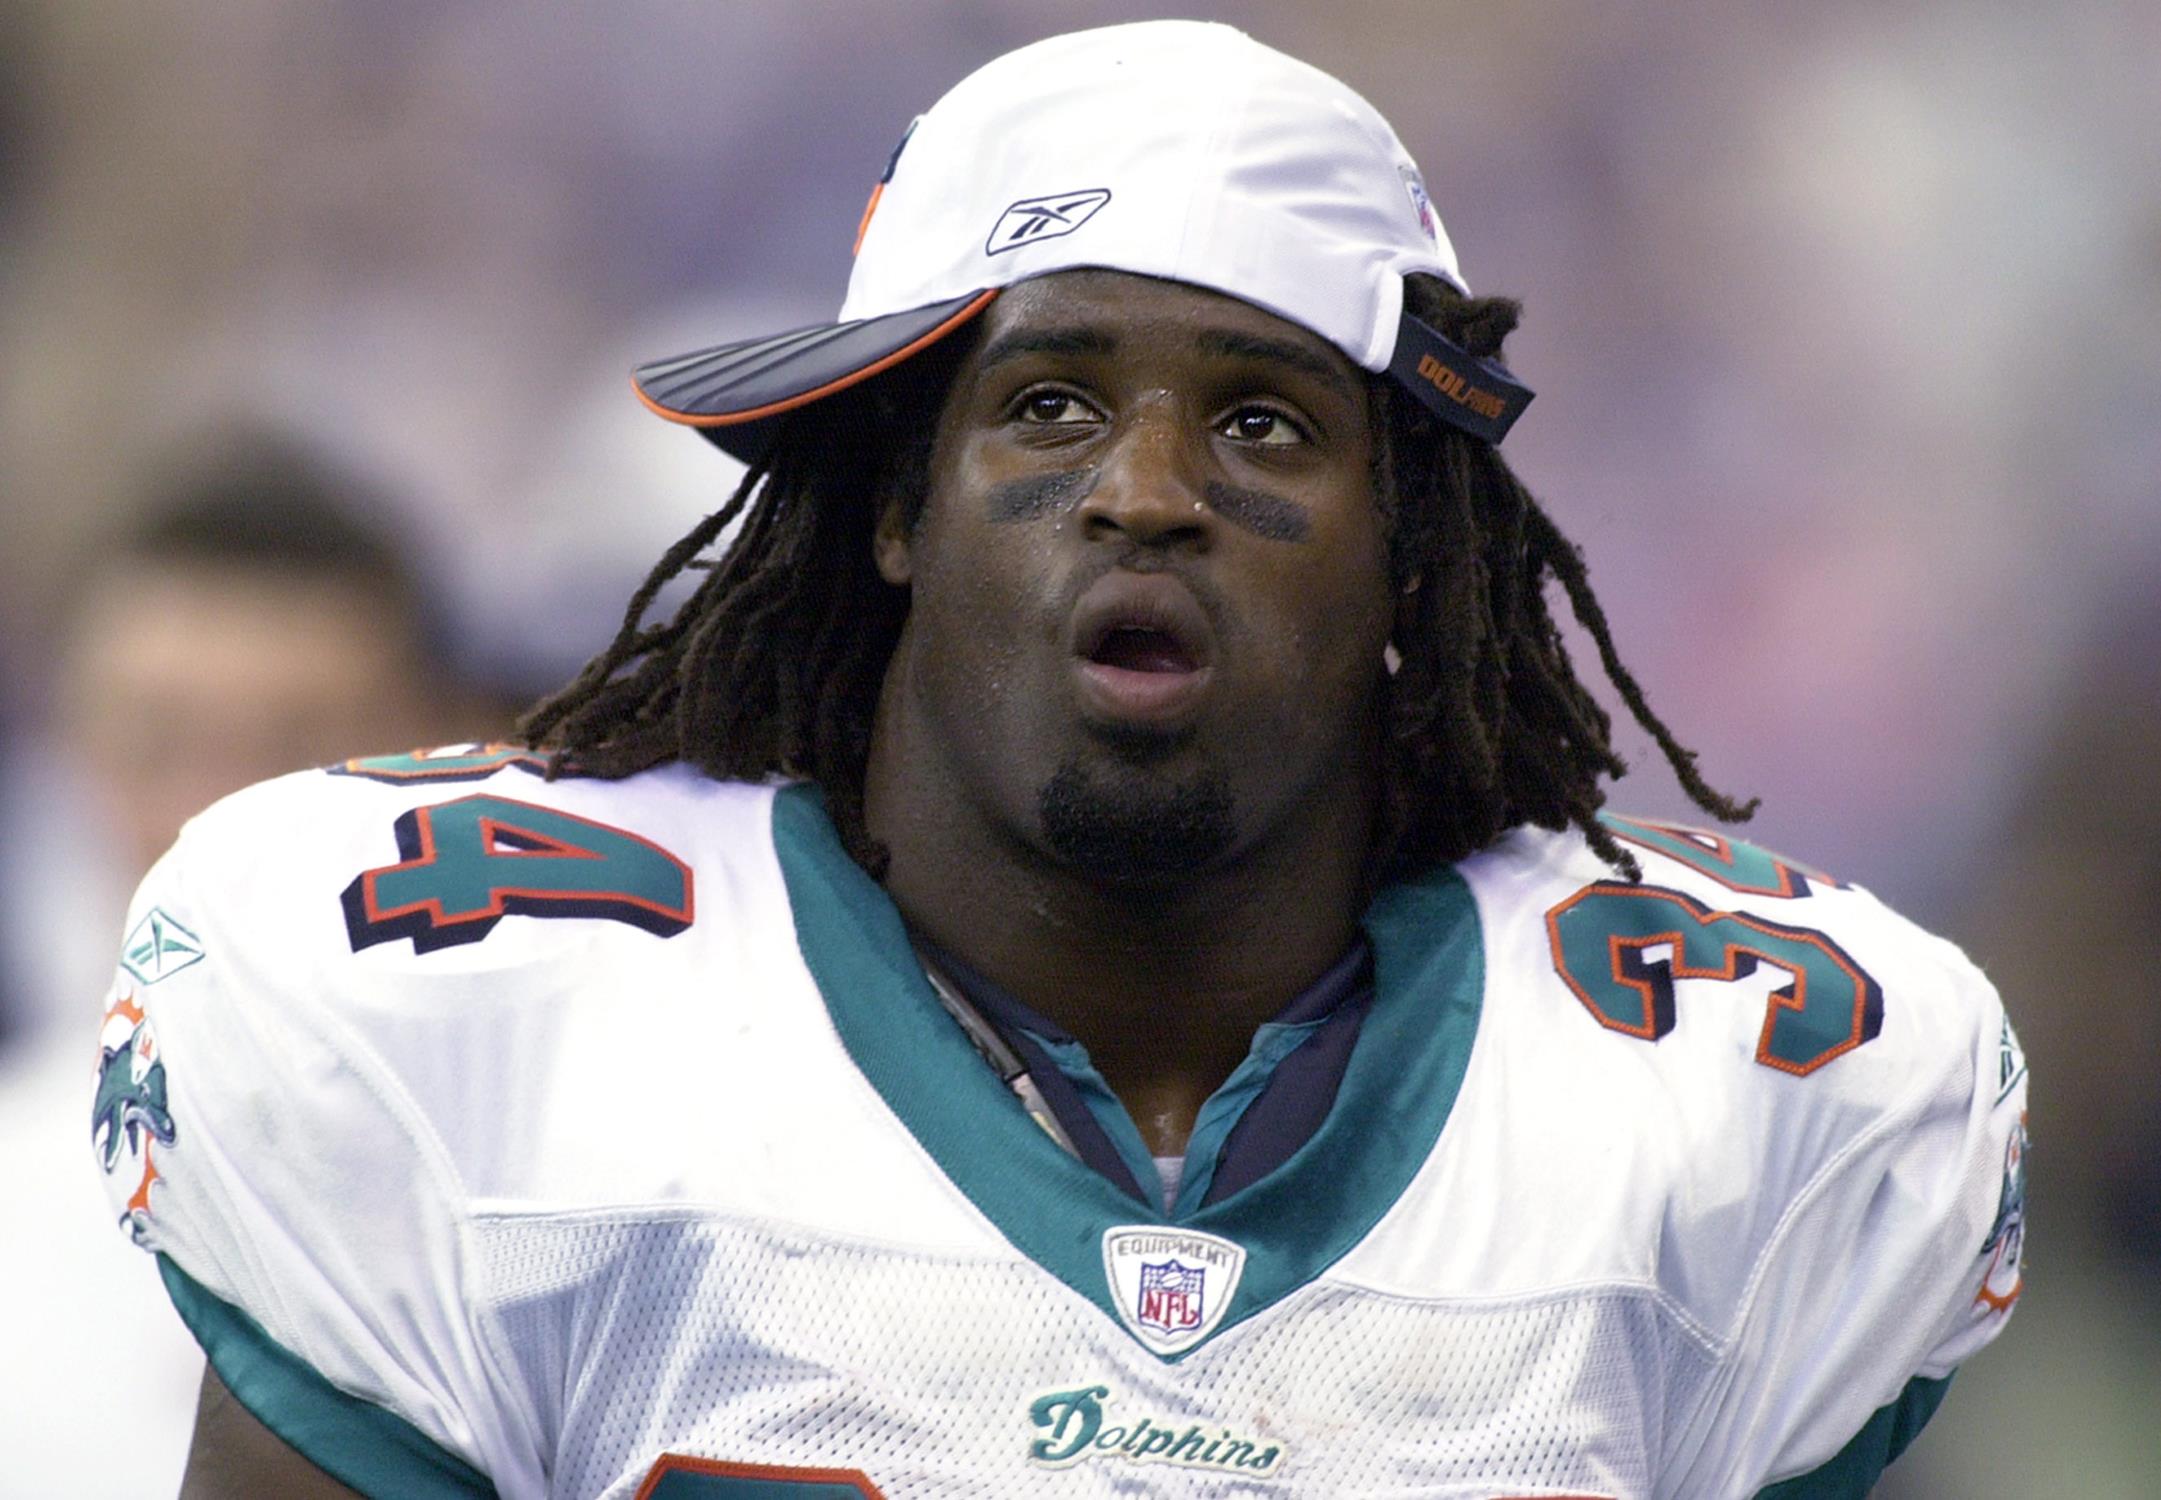 ricky-williams-reveals-his-potential-in-baseball-and-football-career-paths